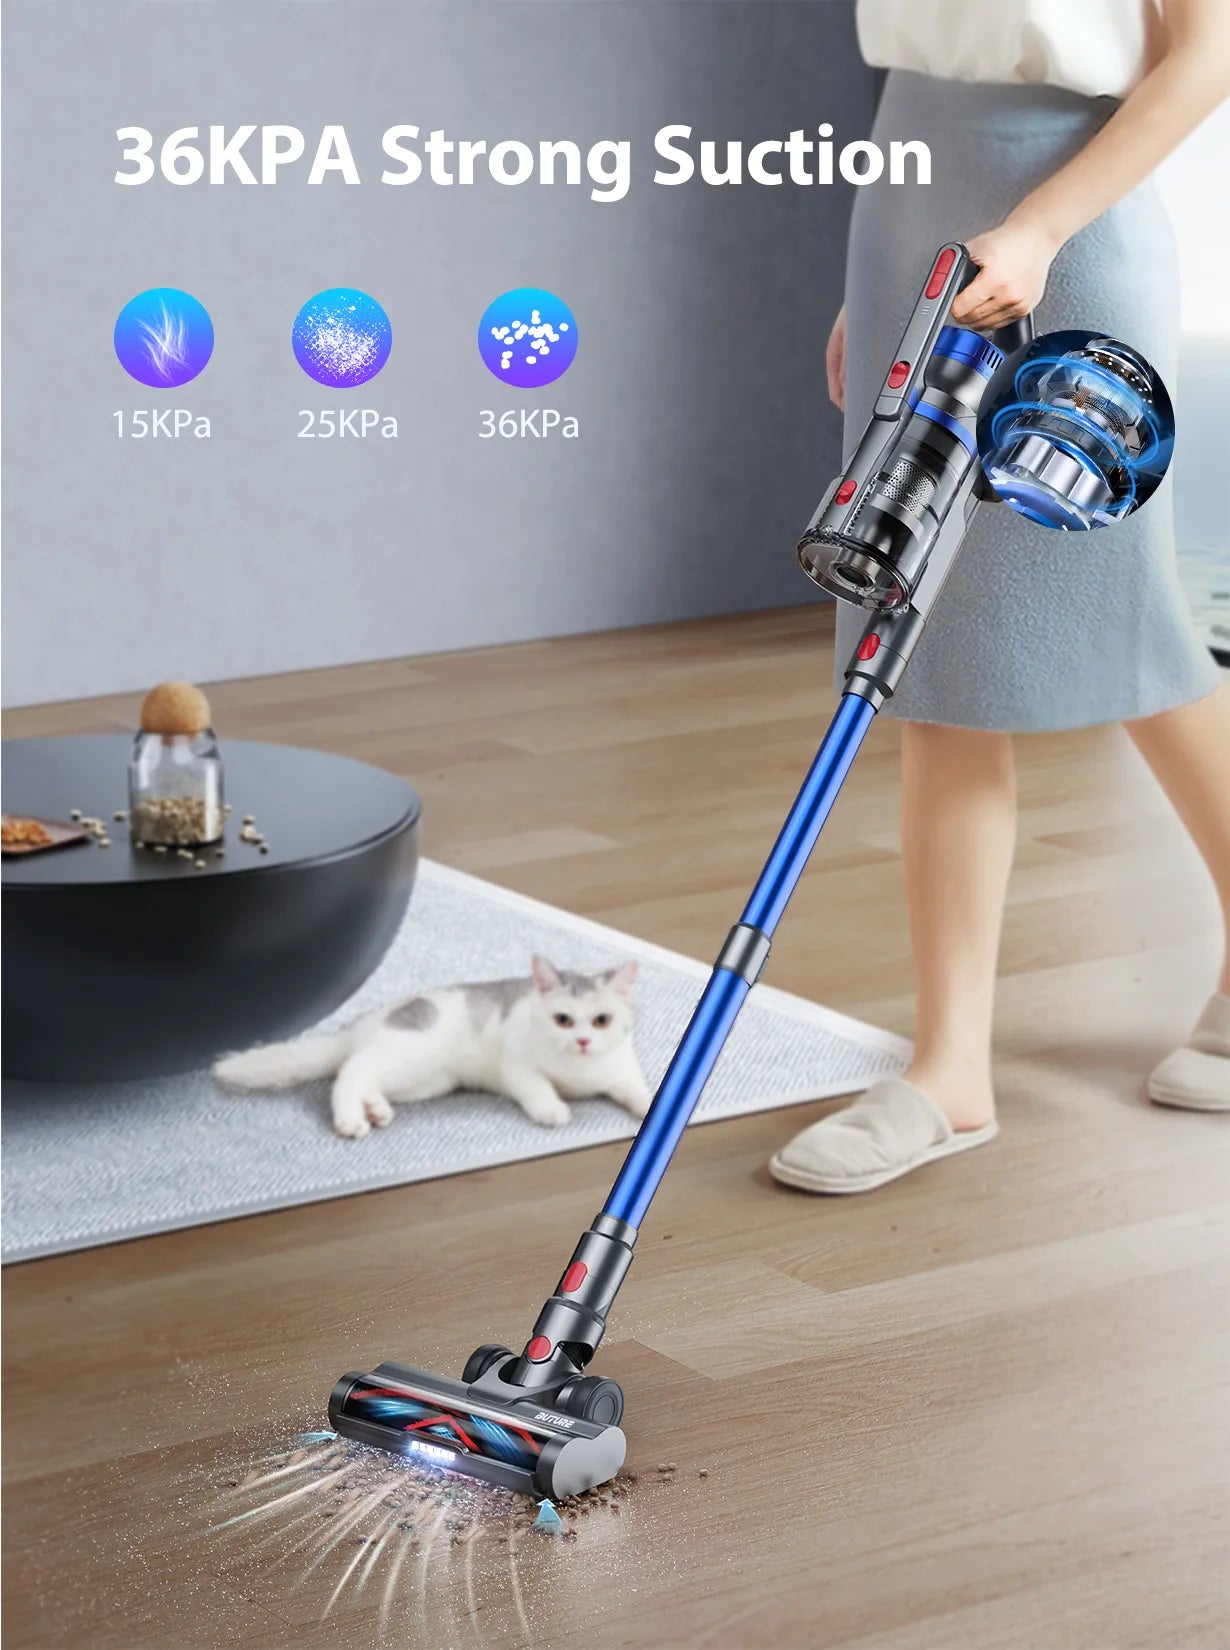 BUTURE JR500 450W 36000PA Suction Power Handheld Cordless Wireless Vacuum Cleaner Home Appliance 1.2L Dust Cup Removable Battery